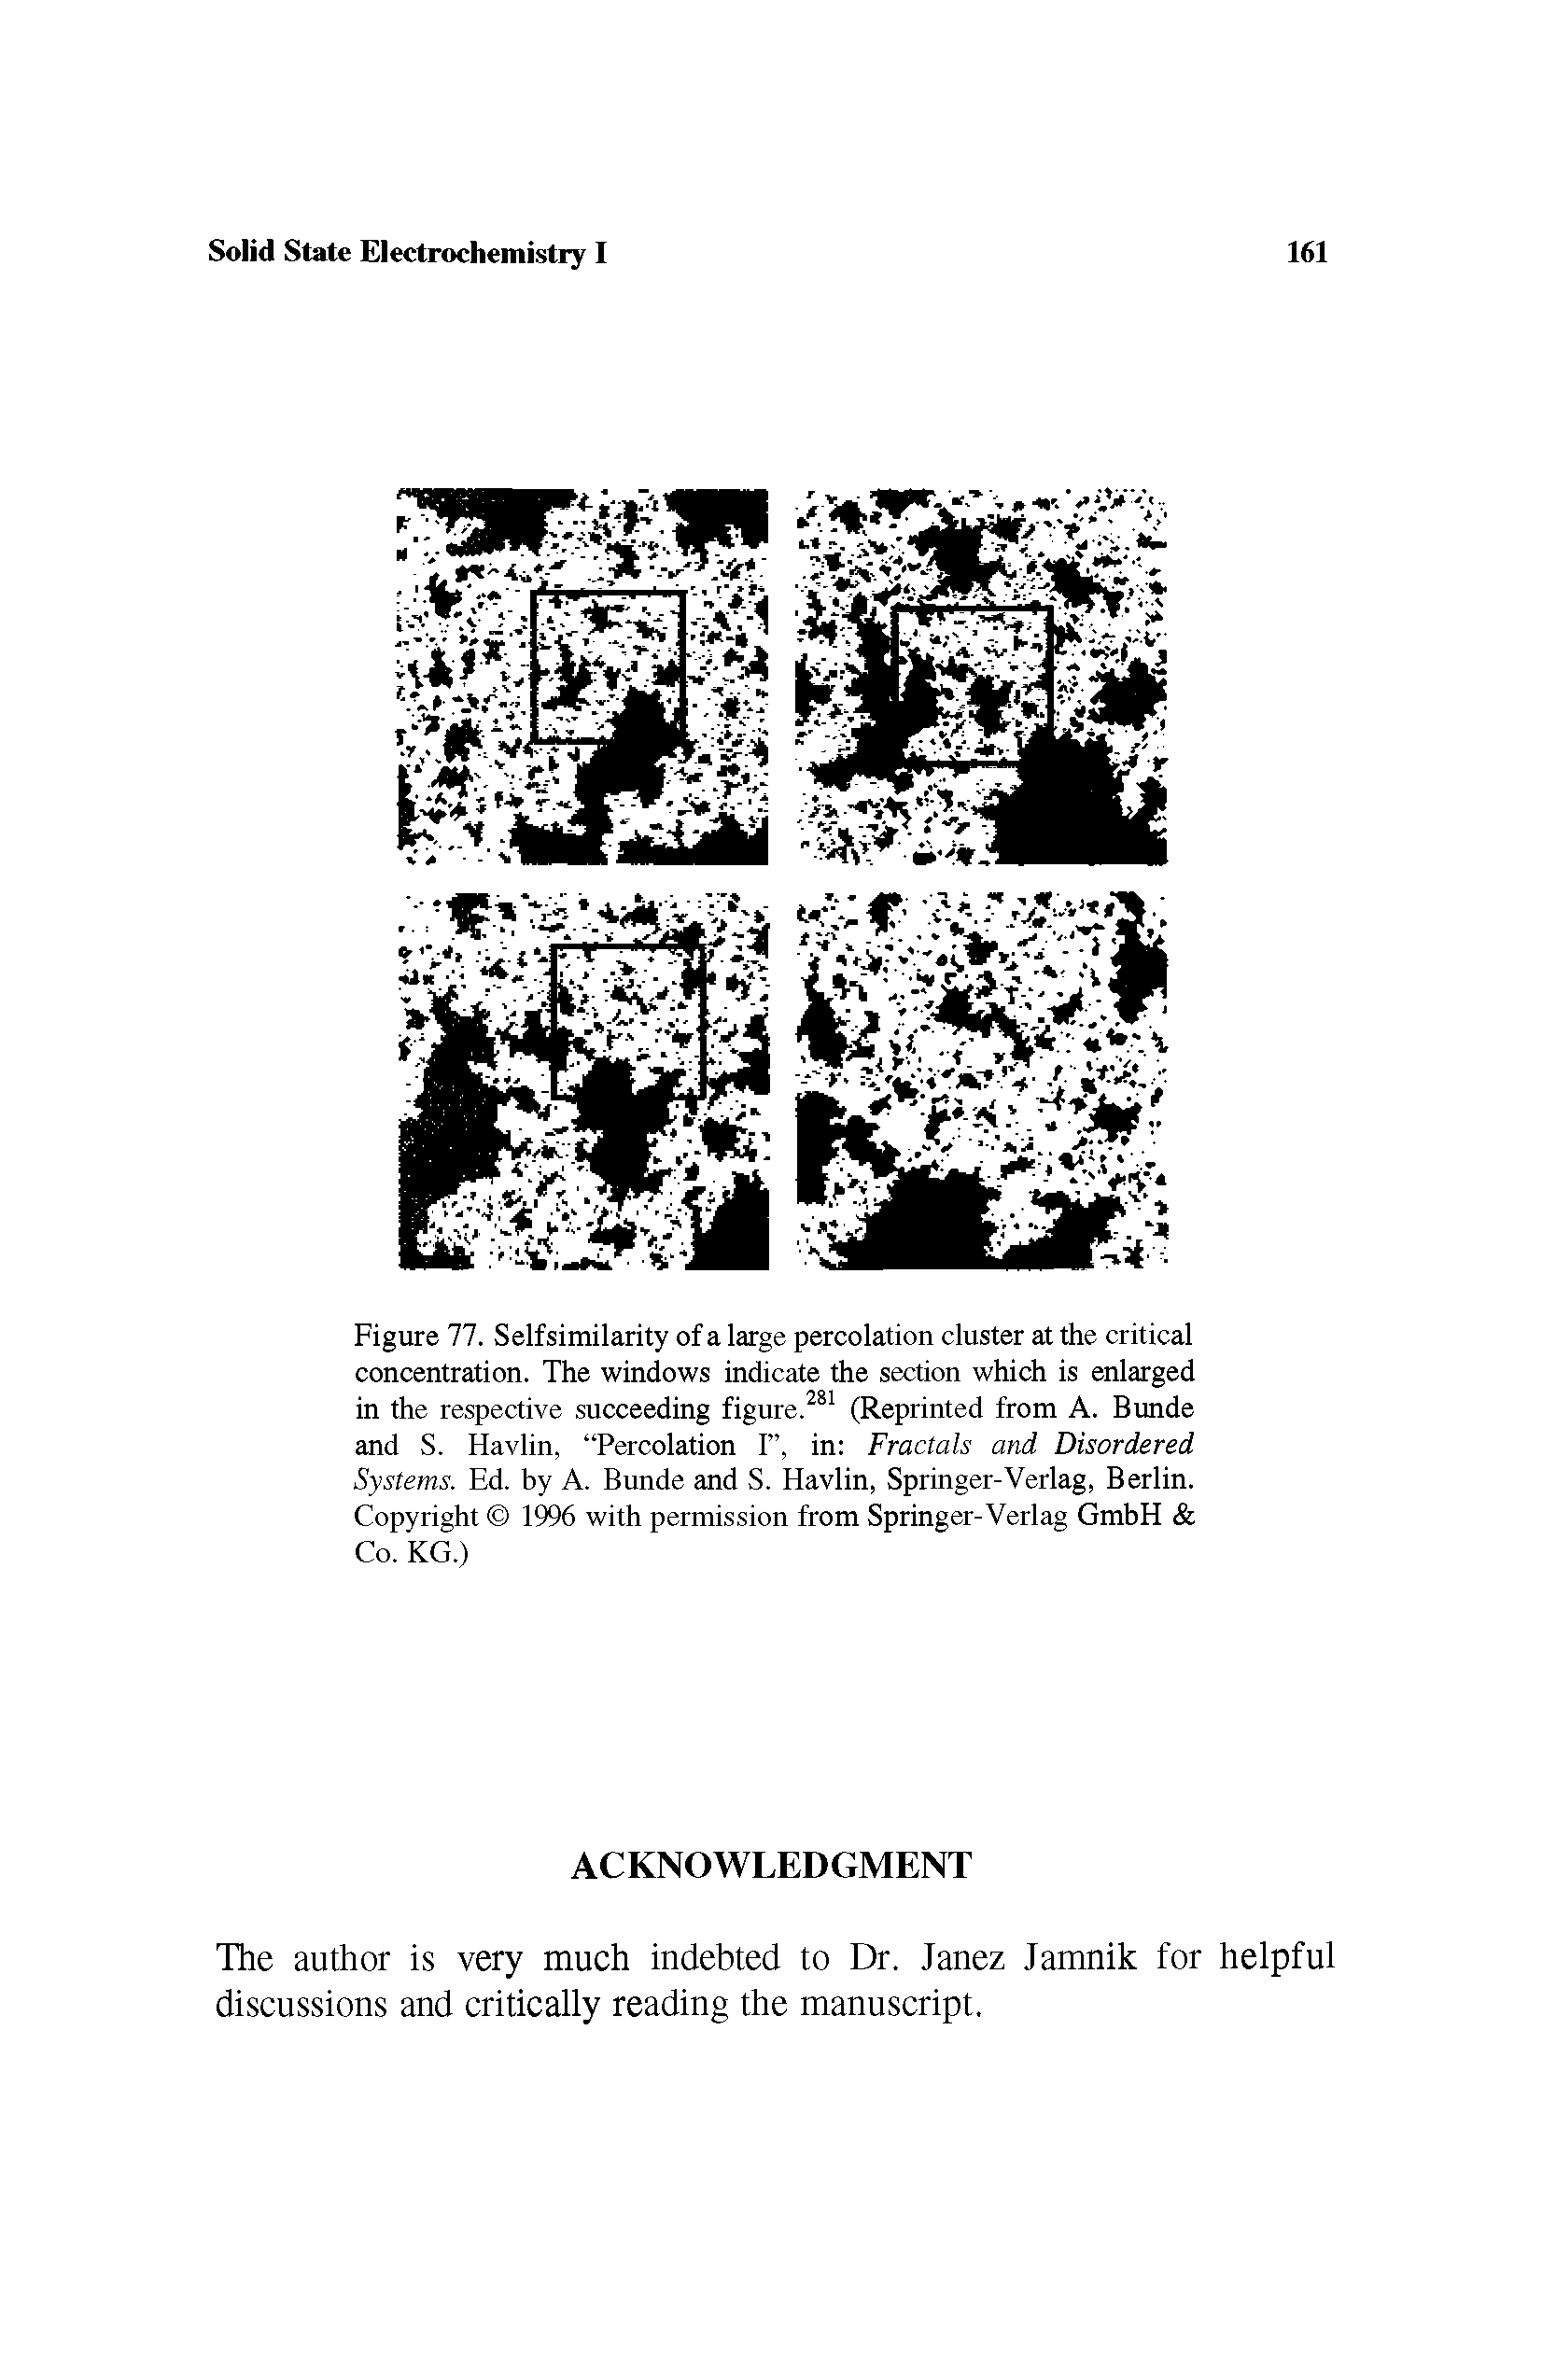 Figure 77. Selfsimilarity of a large percolation cluster at the critical concentration. The windows indicate the section which is enlarged in the respective succeeding figure.281 (Reprinted from A. Bunde and S. Havlin, Percolation I , in Fractals and Disordered Systems. Ed. by A. Bunde and S. Havlin, Springer-Verlag, Berlin. Copyright 1996 with permission from Springer-Verlag GmbH Co. KG.)...